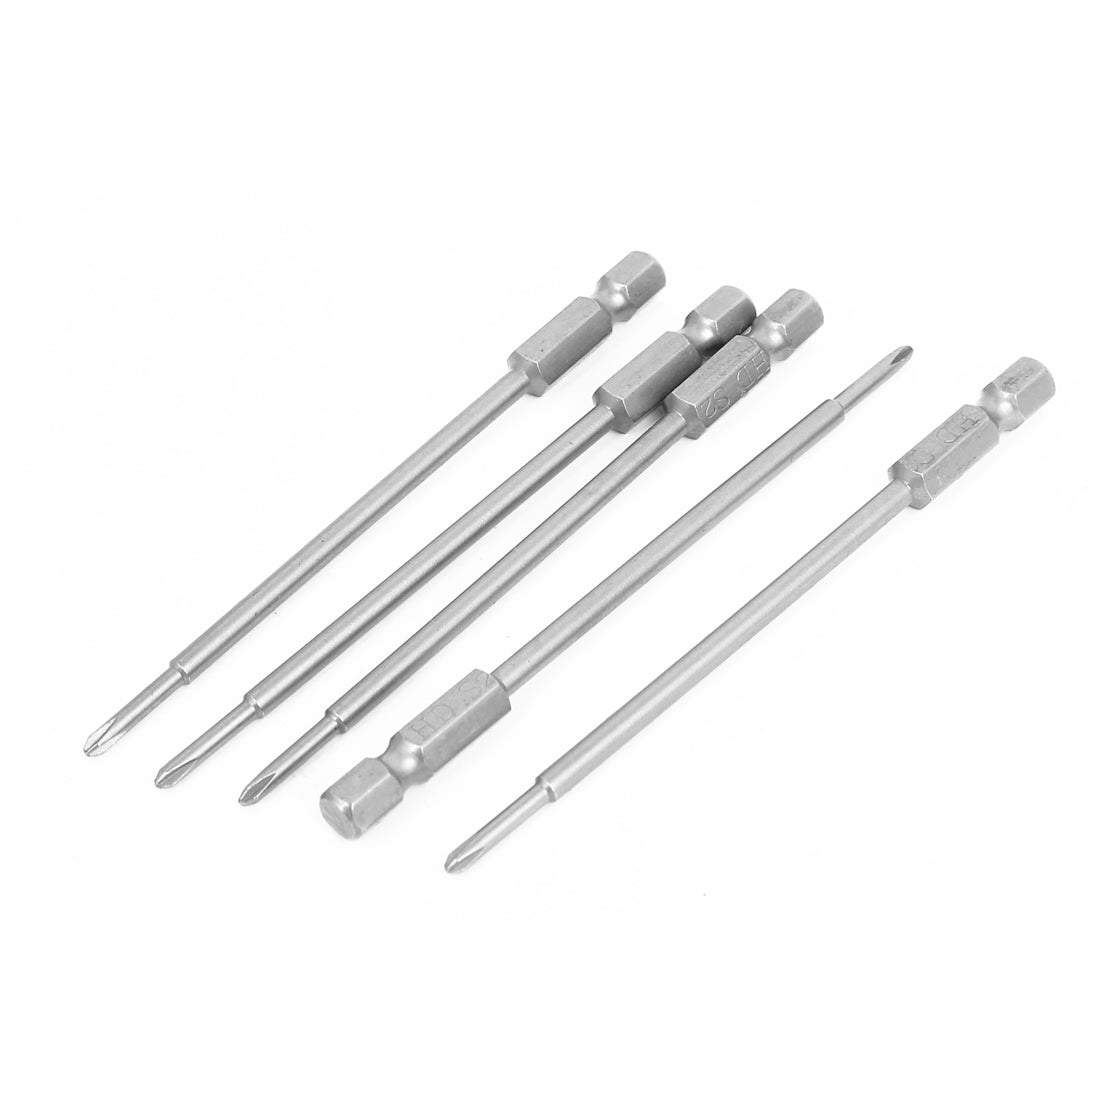 uxcell Uxcell 100mm Long PH0 Magnetic 2.0mm Phillips Head Screwdriver Bits 5pcs